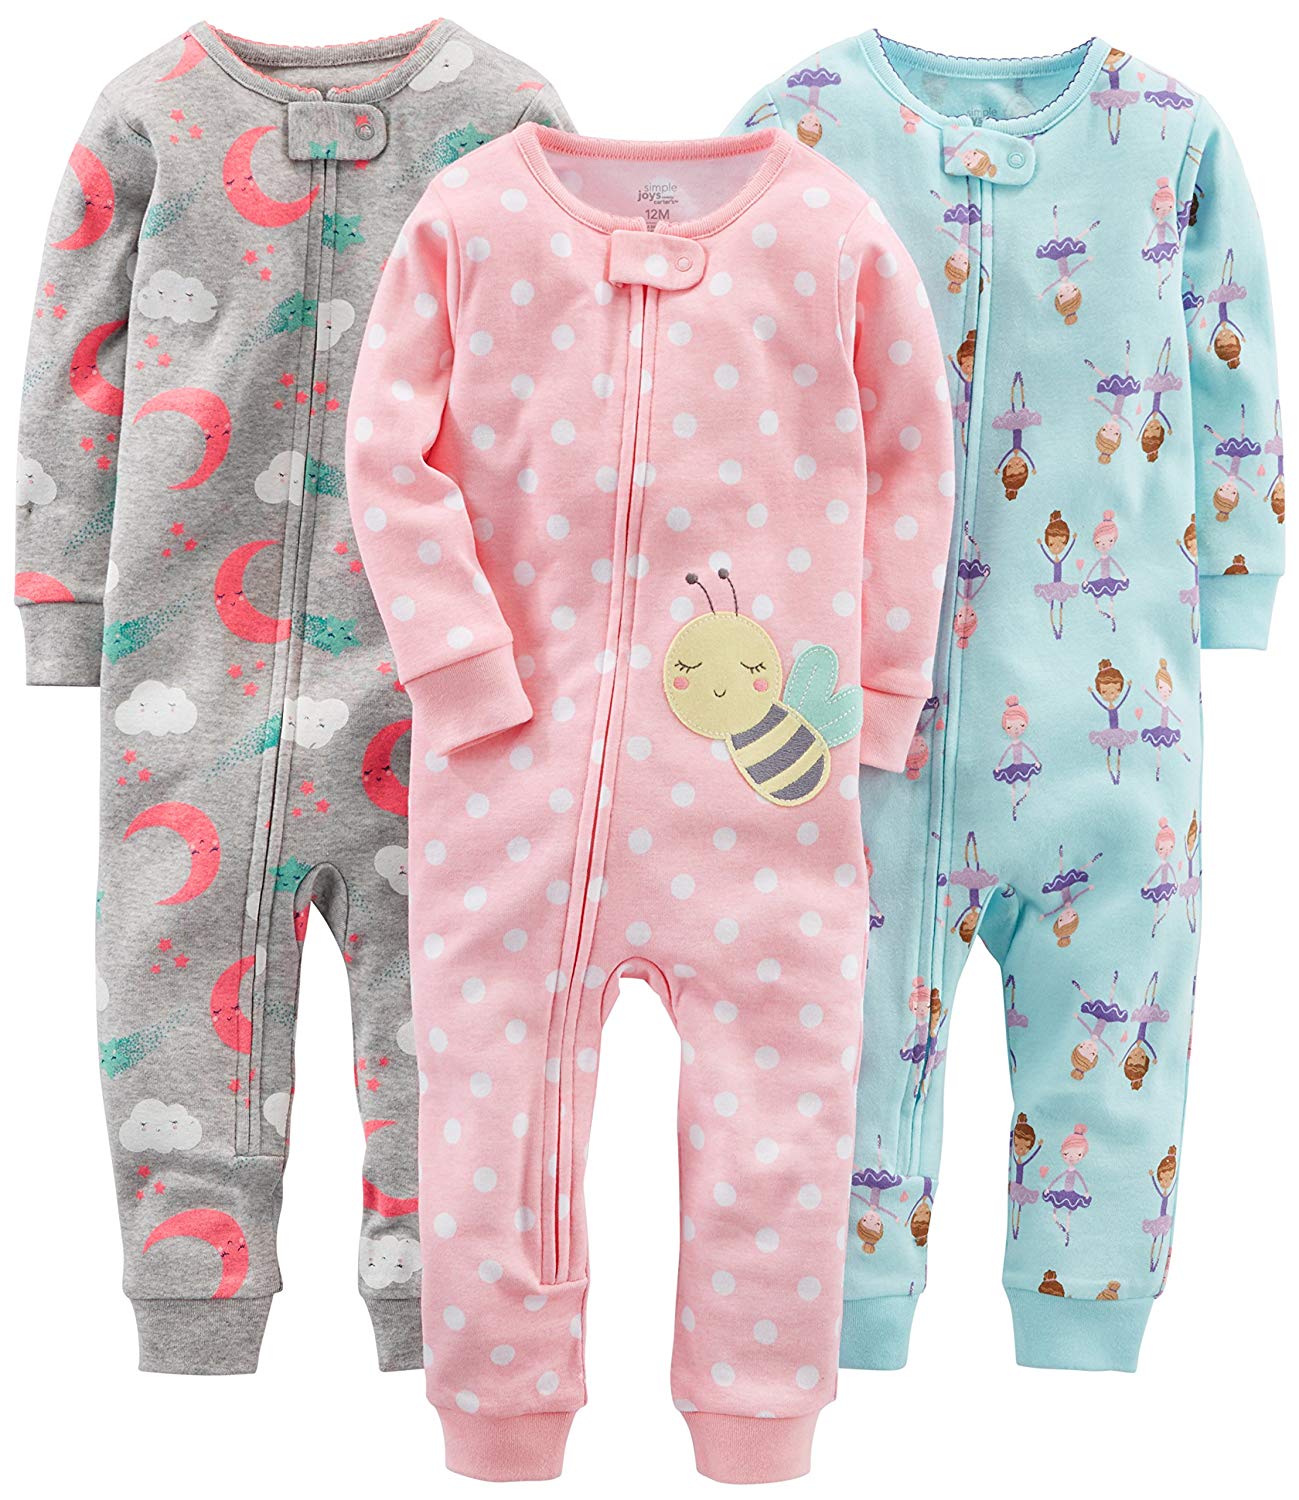 Simple Joys by Carter's Baby Girls' 3Pack, Ballerina/Moon/Bee, Size 18 Months 5 190796335728 eBay